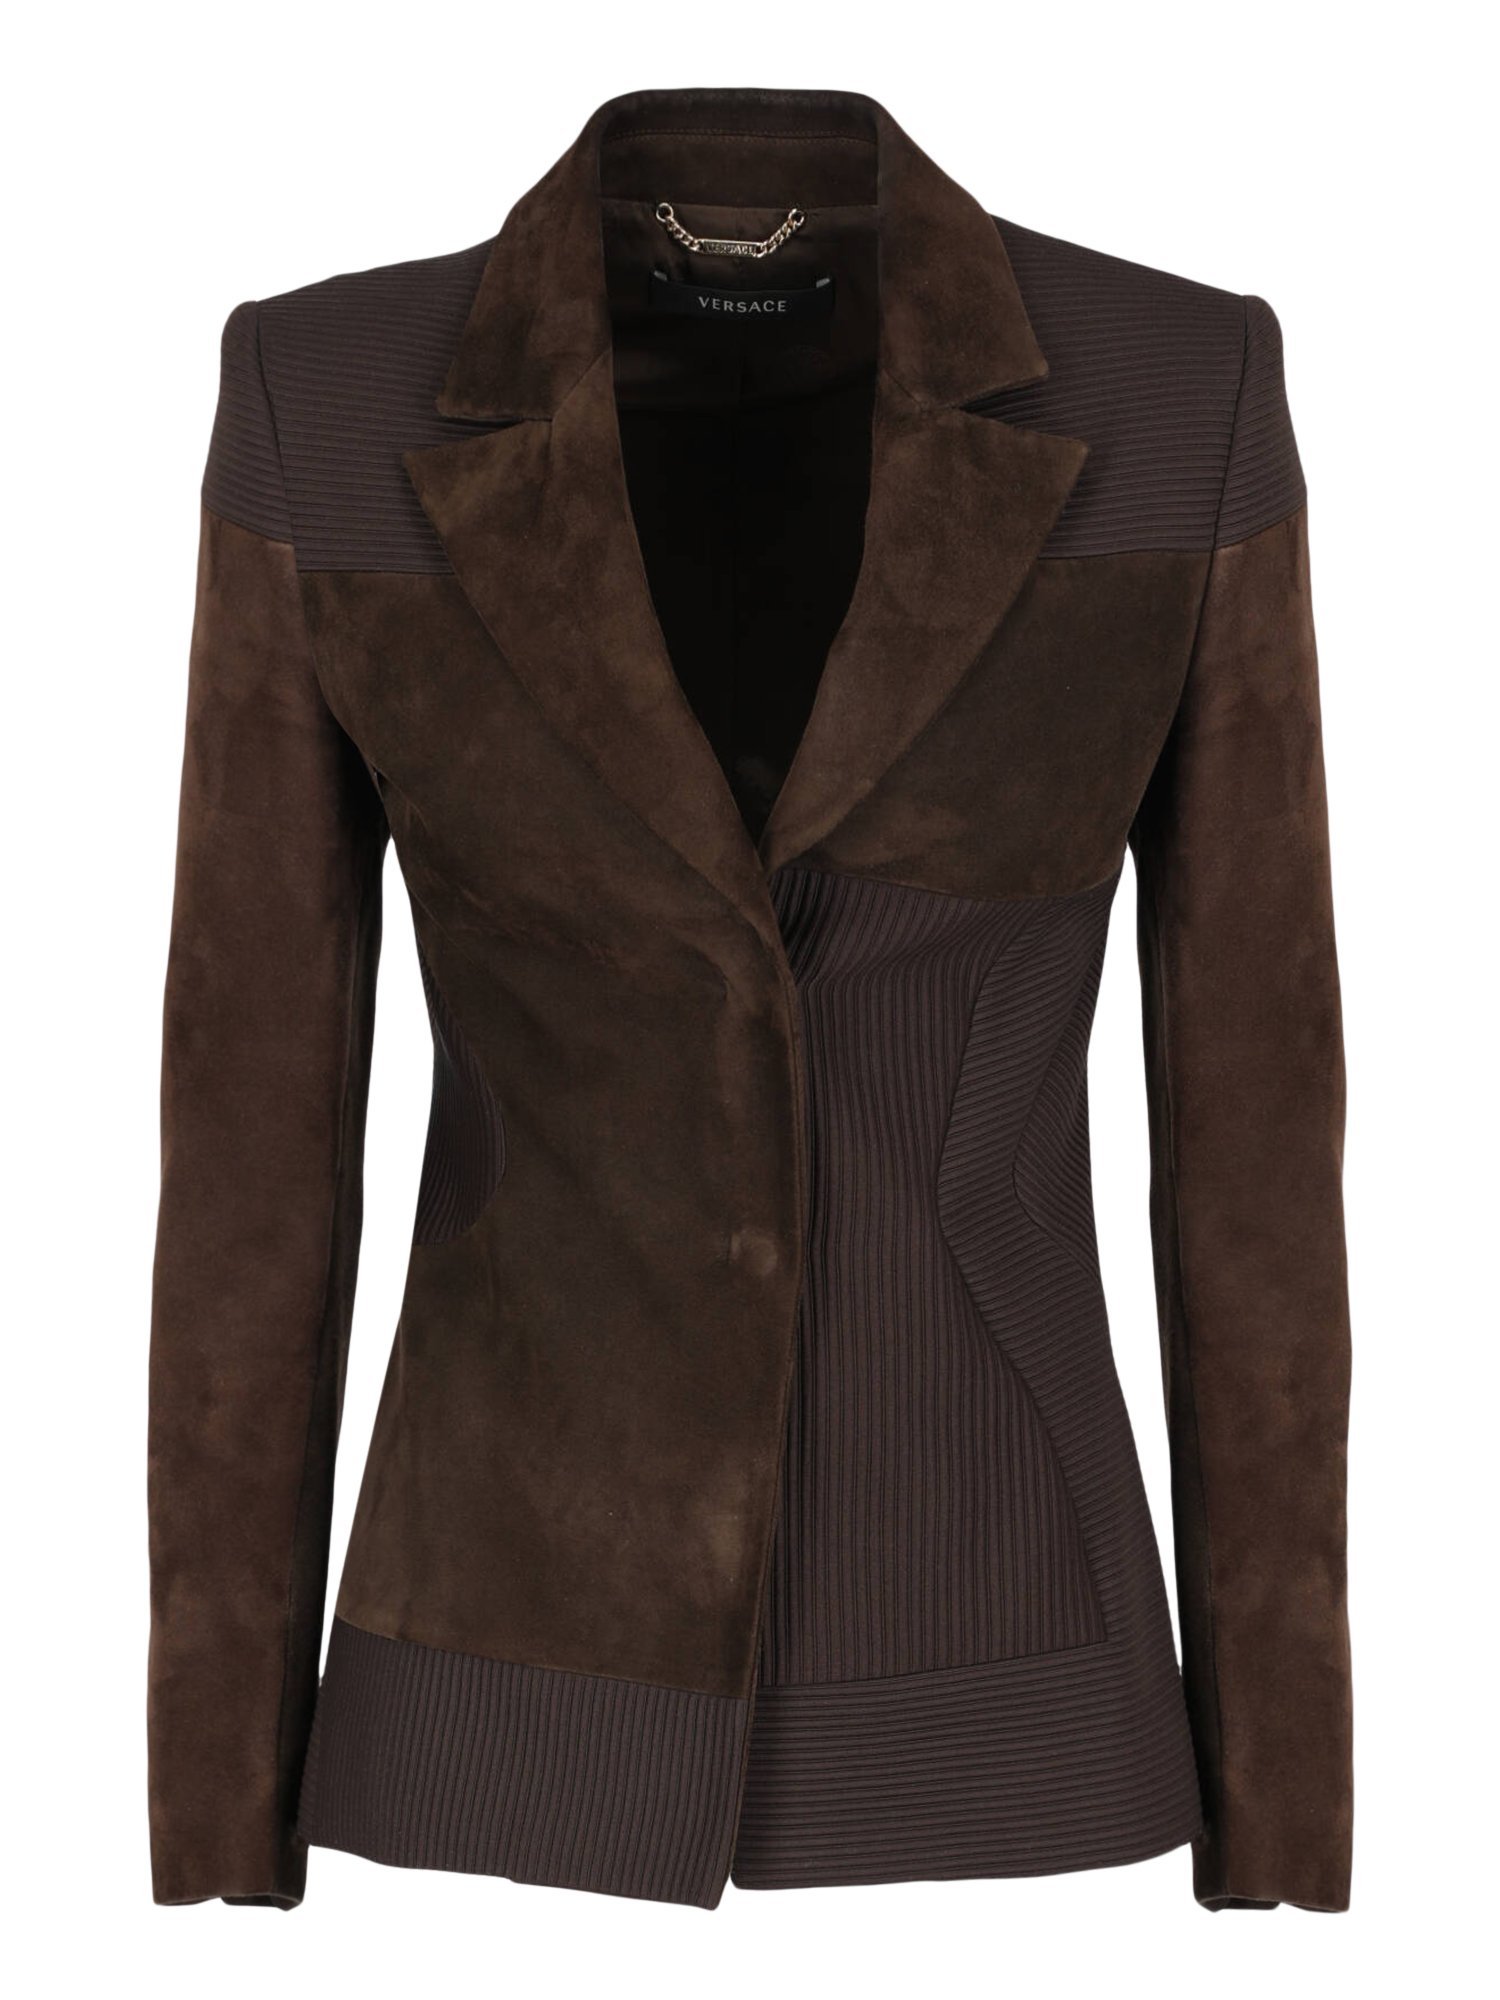 Pre-owned Versace Women's Jackets -  - In Brown Leather